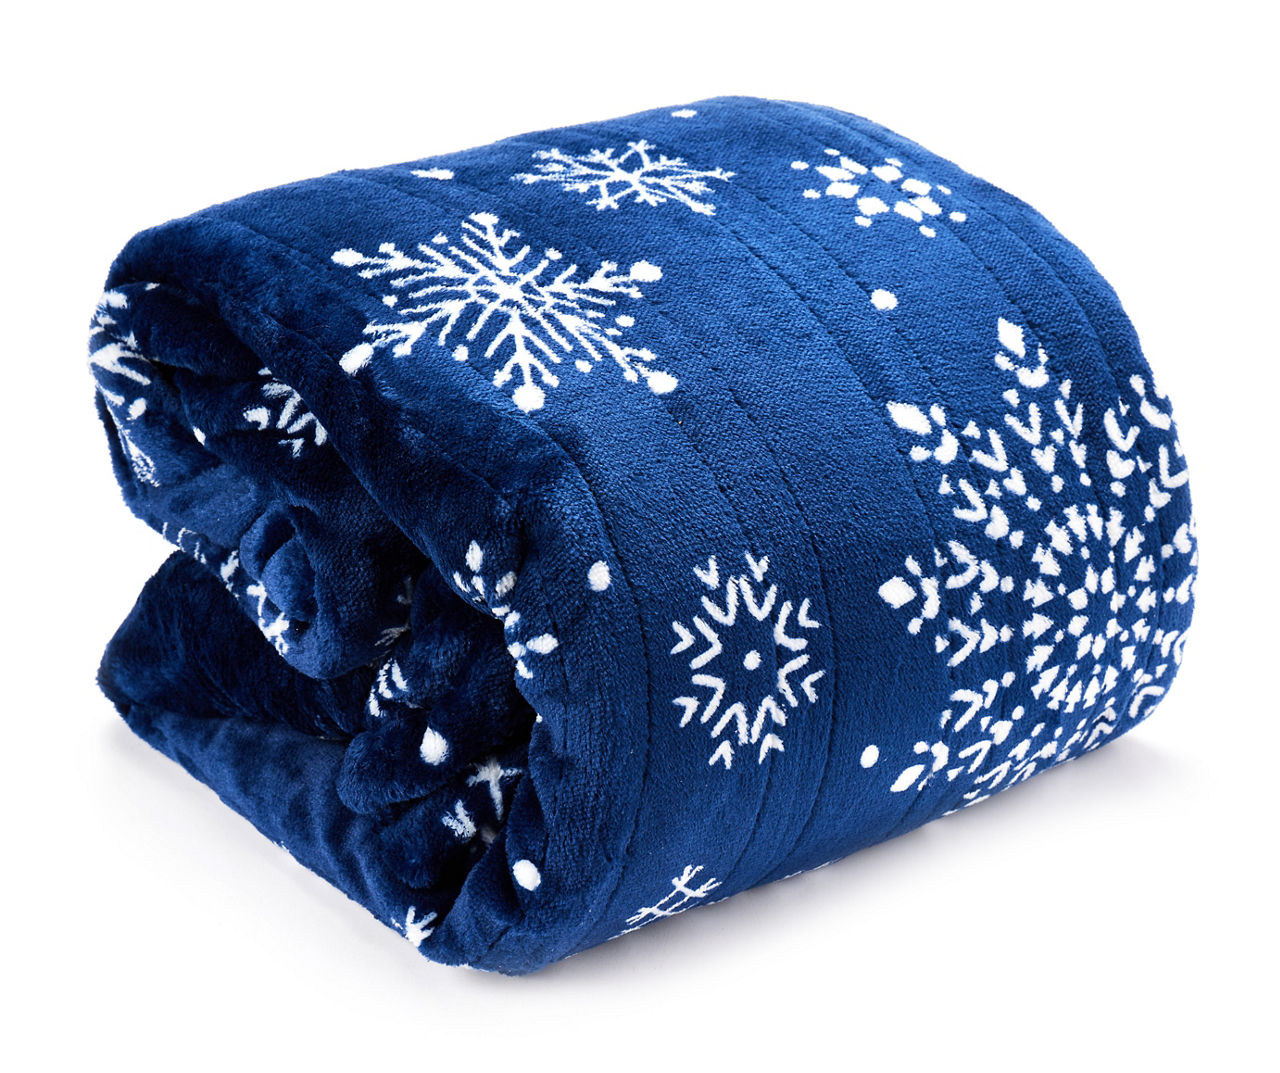 Blue Truck Plush Throw Pillow, Sold by at Home